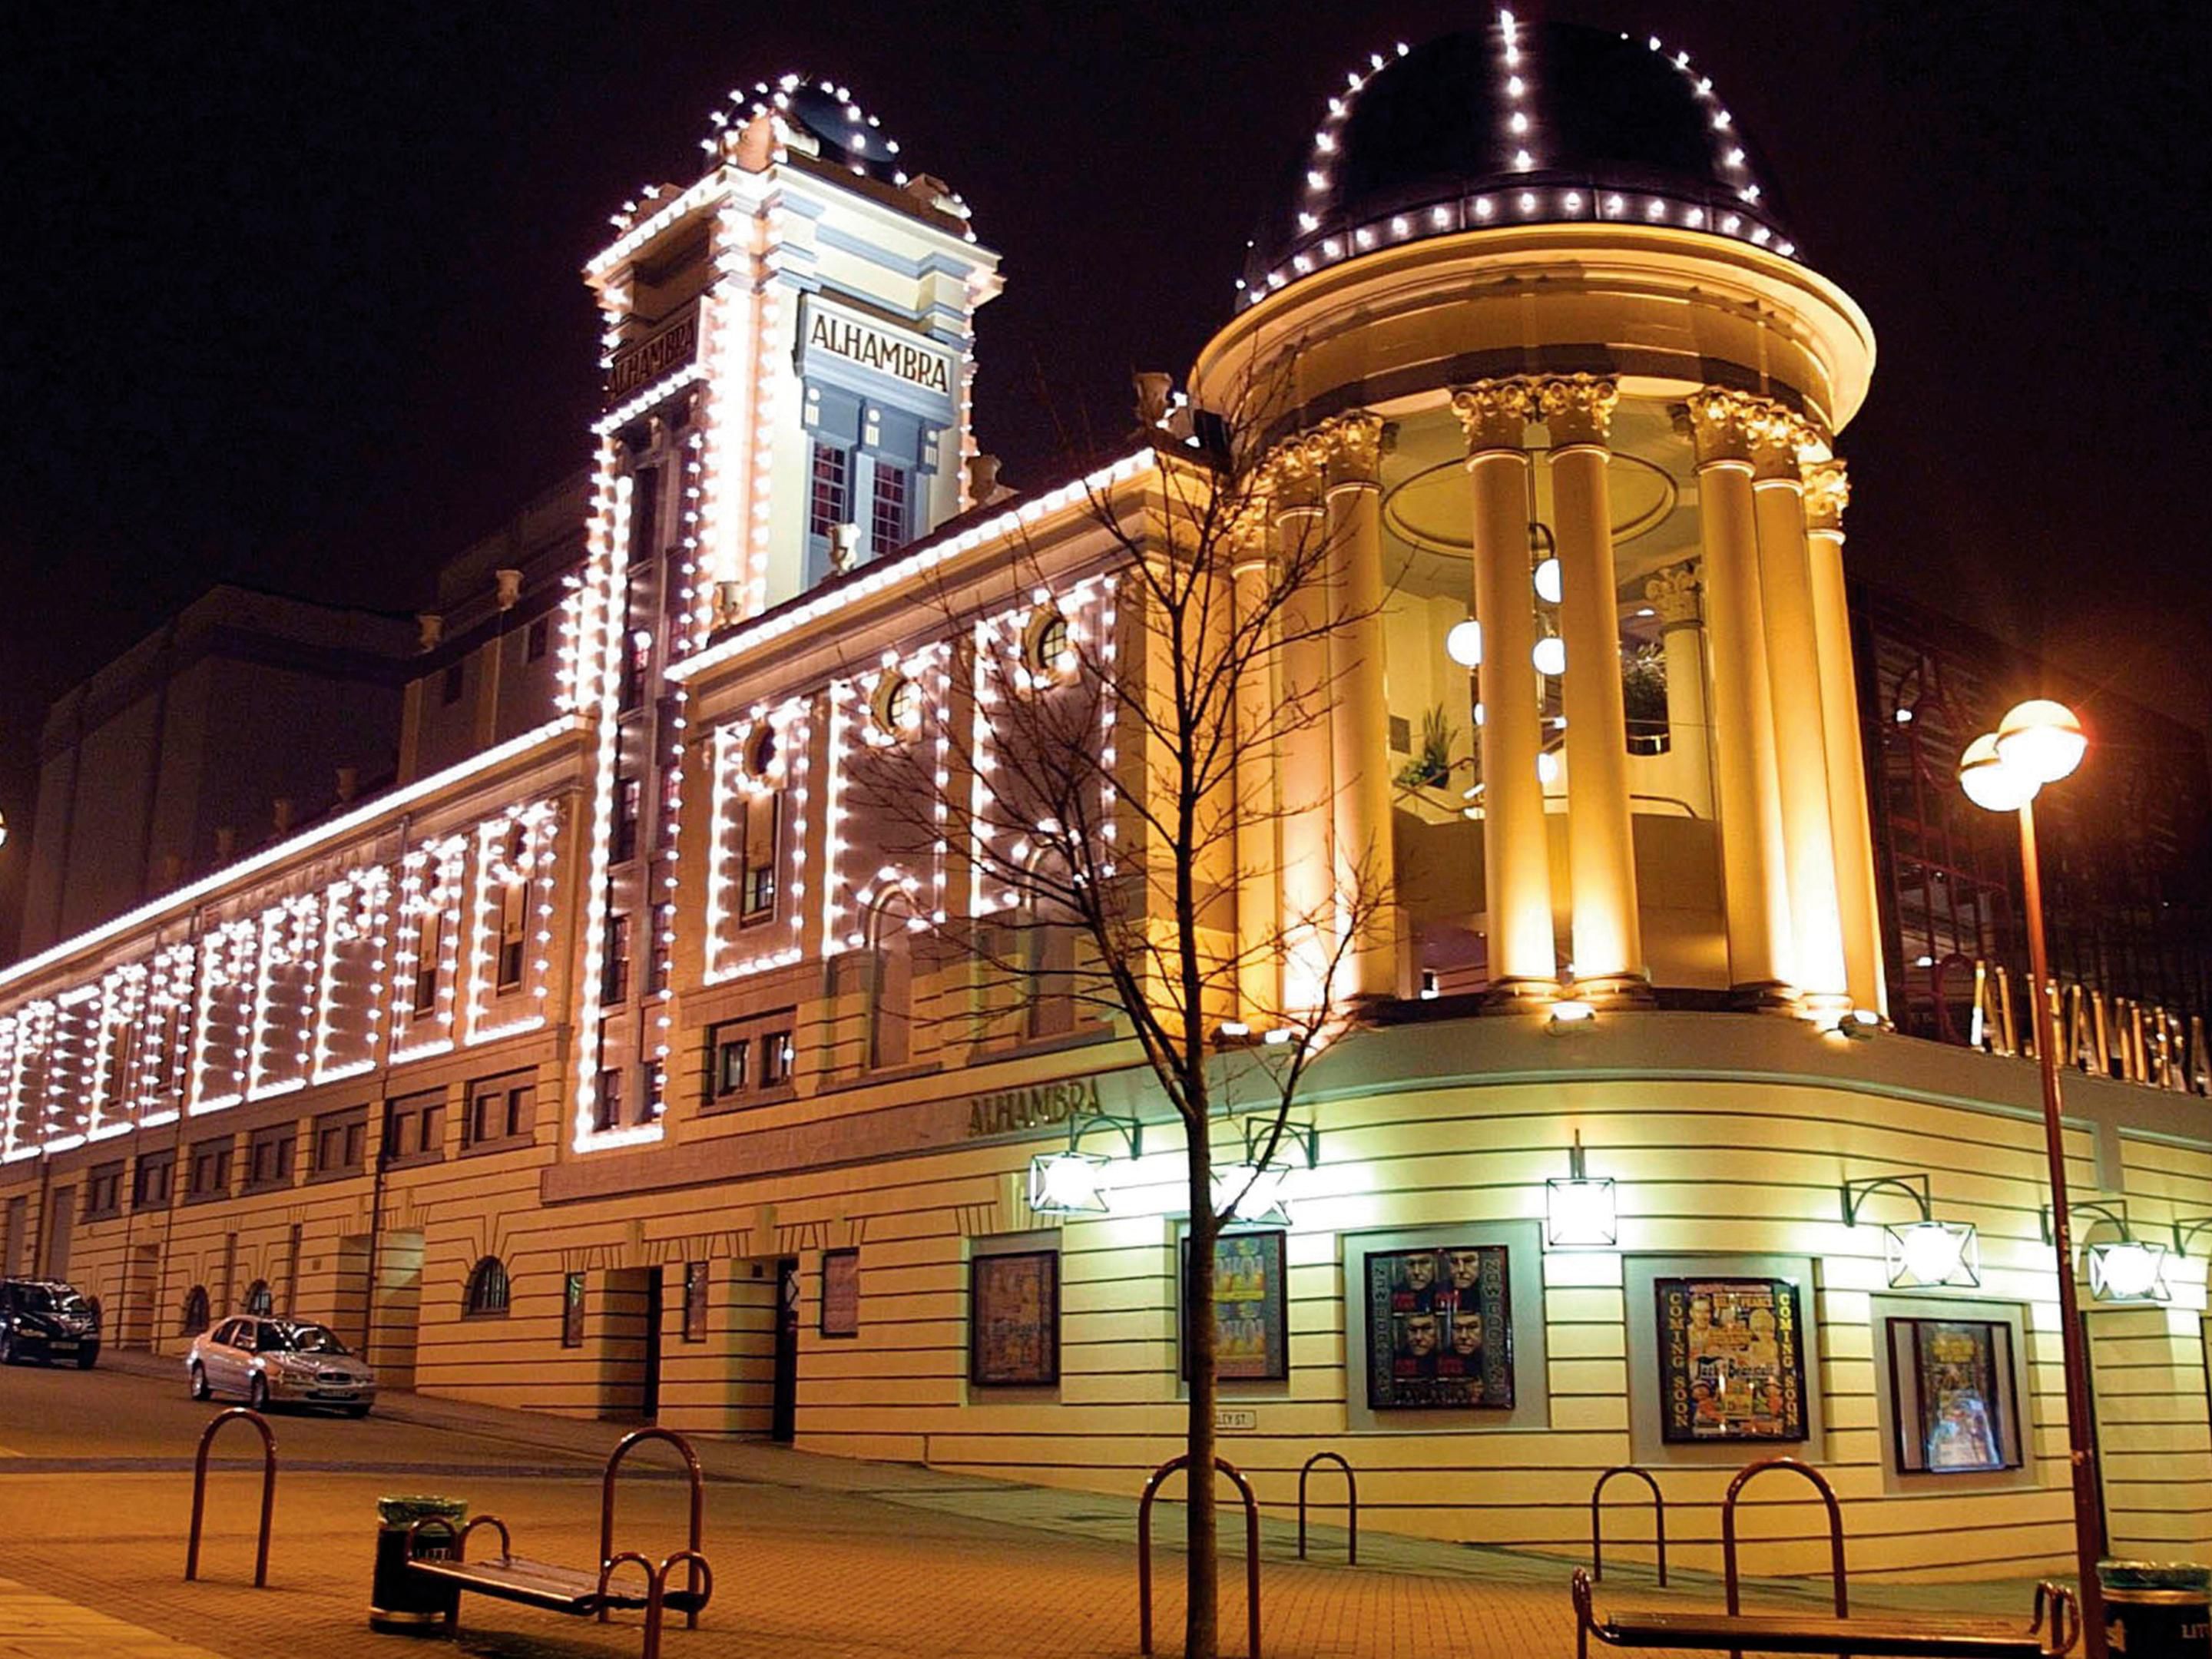 Catch a show at the Alhambra Theatre, a 10-minute walk away